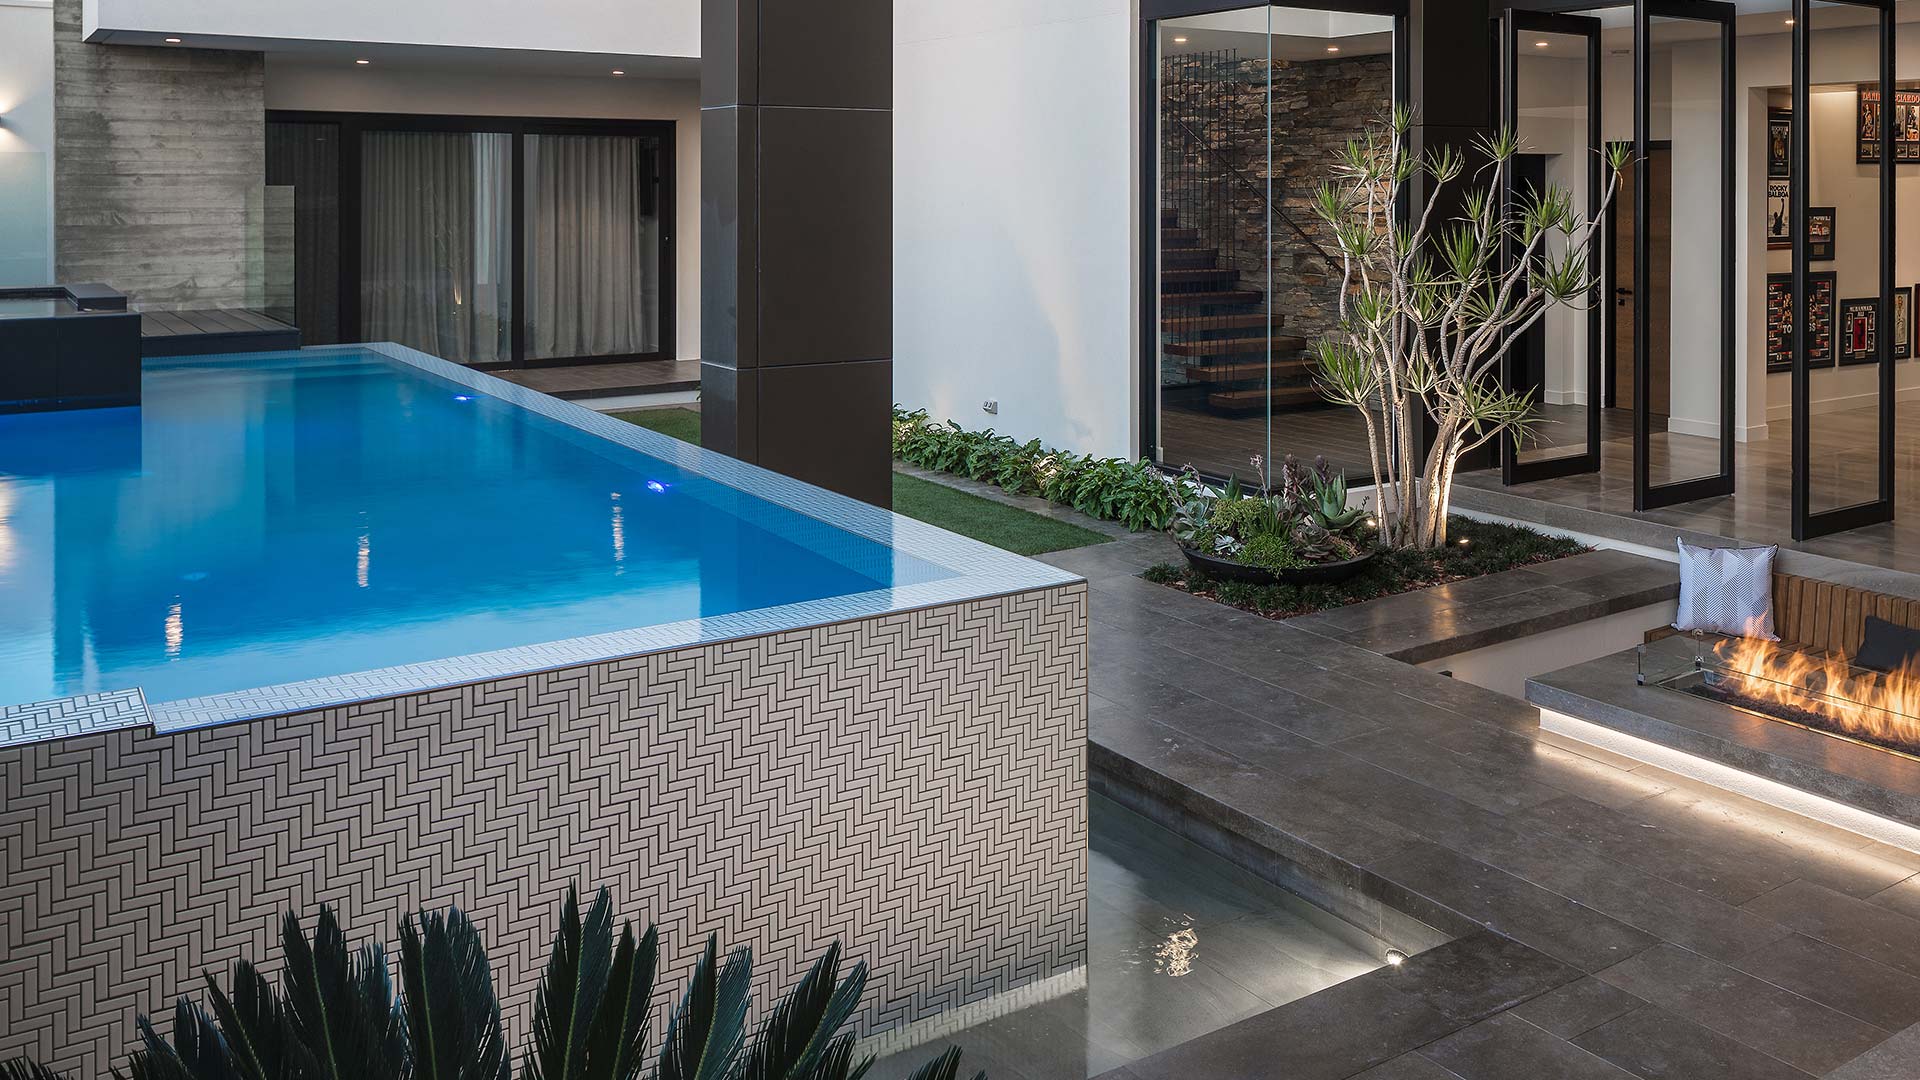 Custom designed infinity edge swimming pool, with herringbone mosaic water edge. Custom design gas fire pit with timber seat. Natural stone paving and wall enhanced with soft planting.